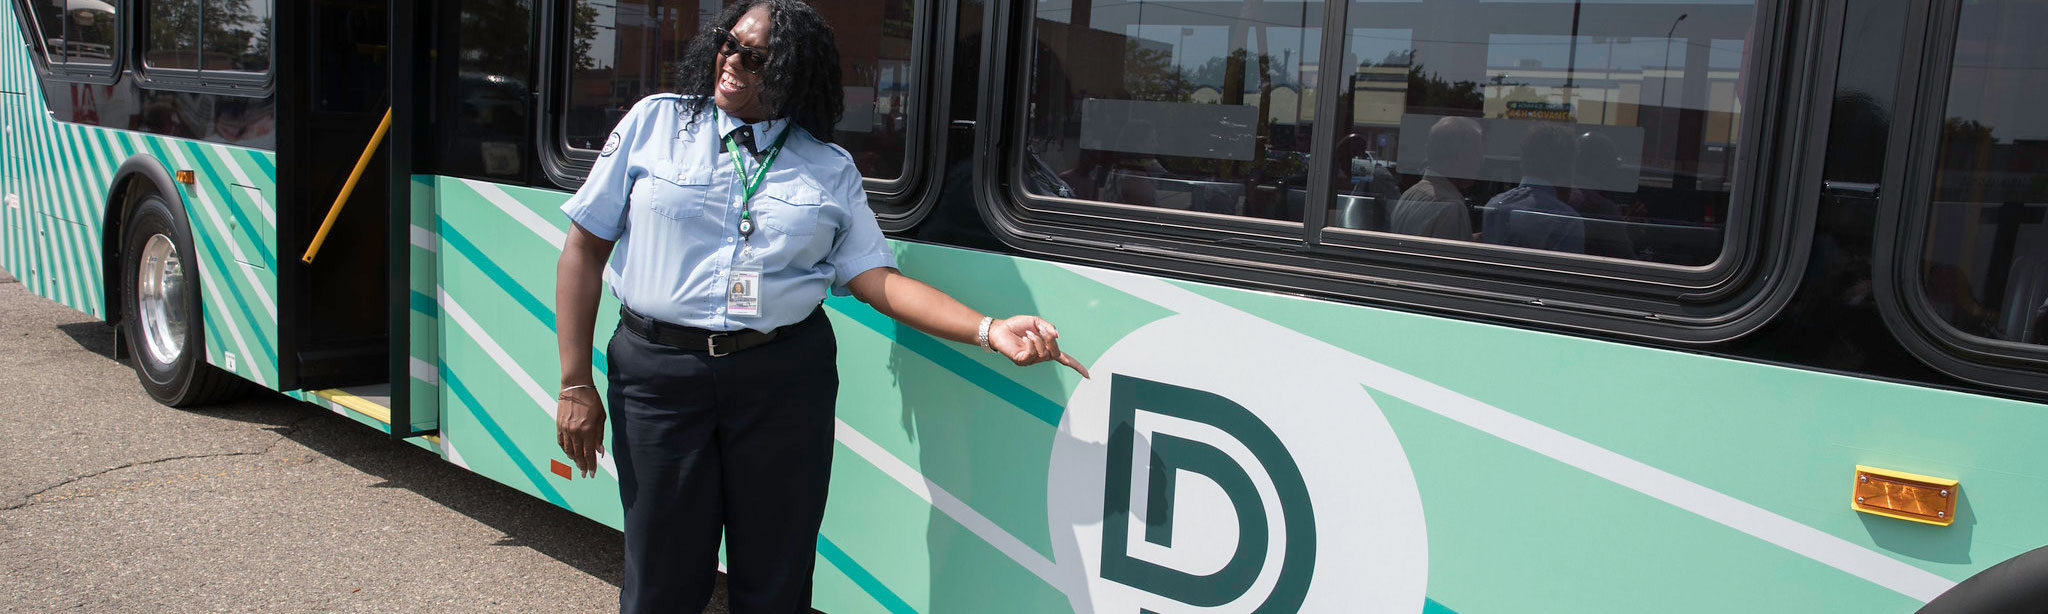 DDOT Woman Points the D